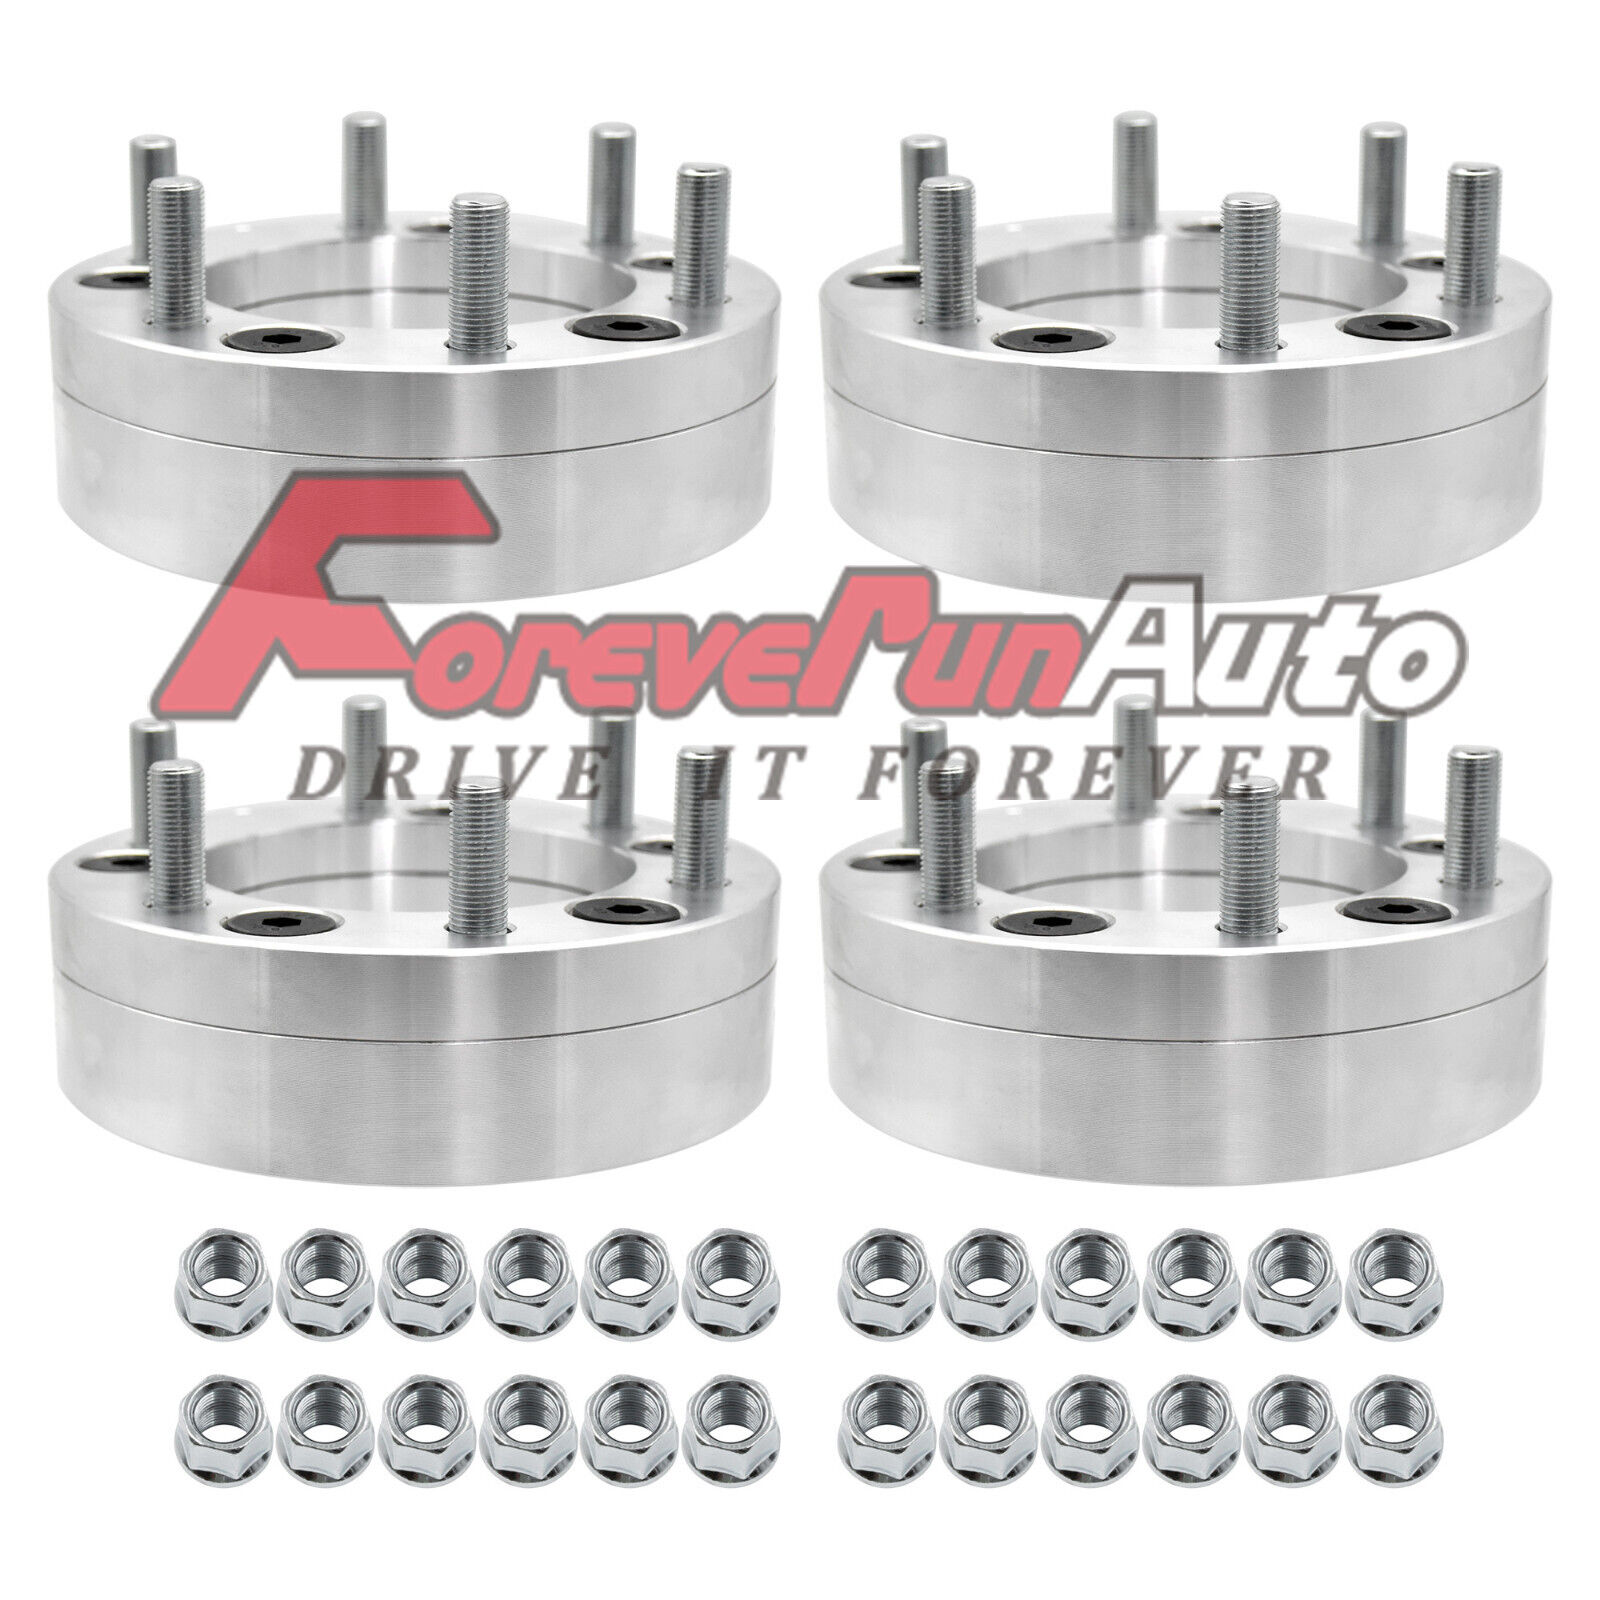 4PC 5x5.5 To 6x5.5 Wheel Spacers Adapters for 6 Lug Silverado Rims on RAM 1500